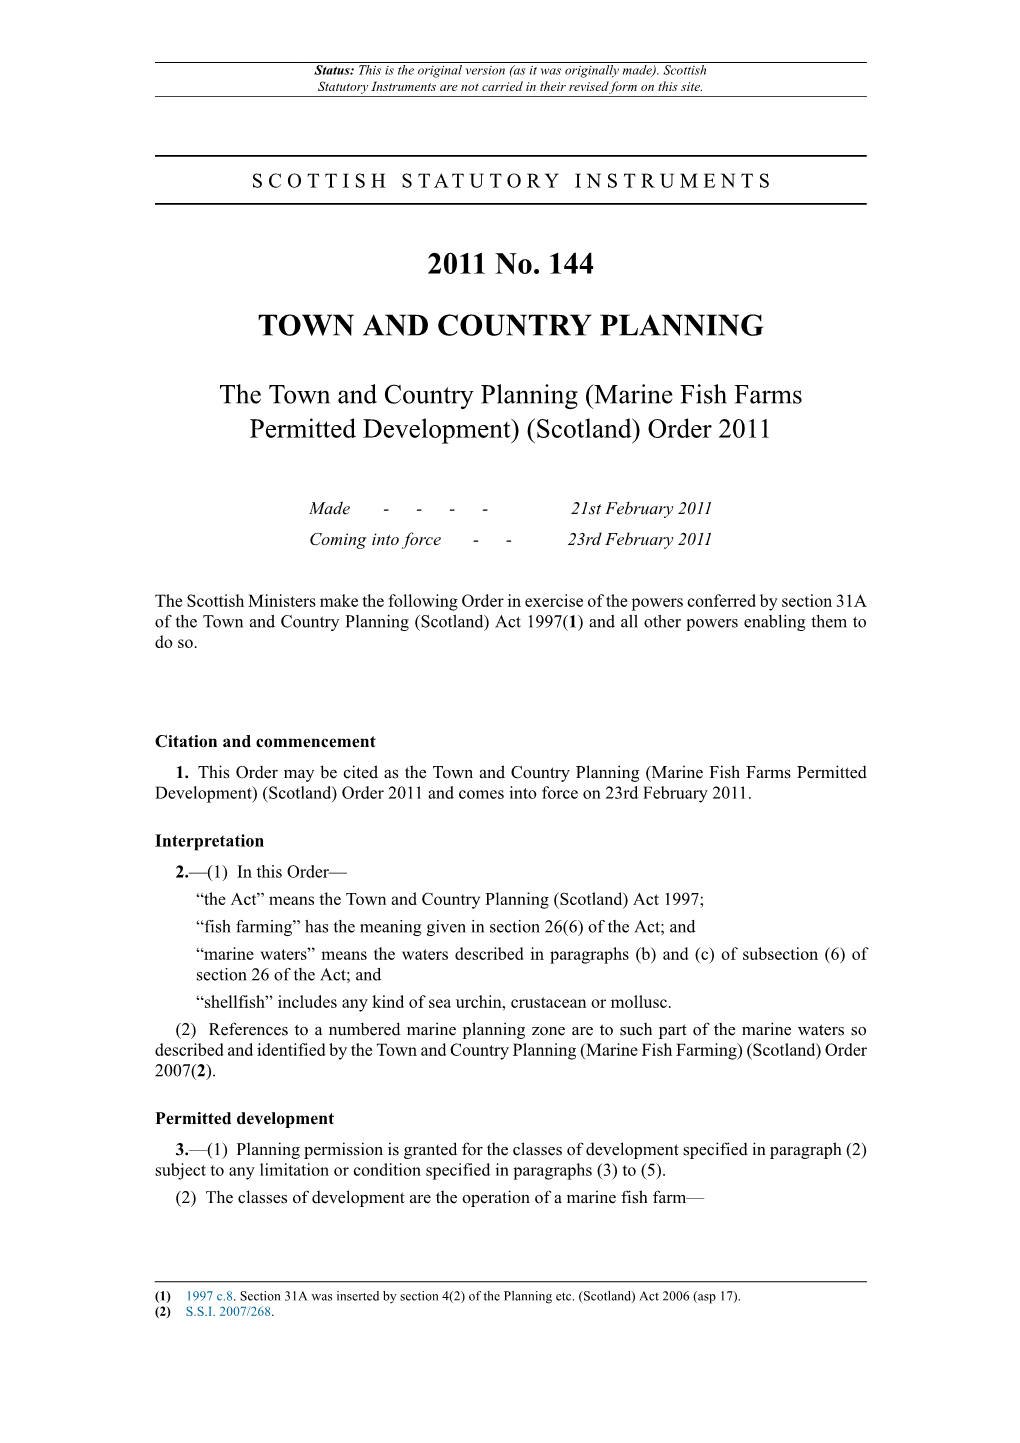 Town and Country Planning (Marine Fish Farms Permitted Development) (Scotland) Order 2011